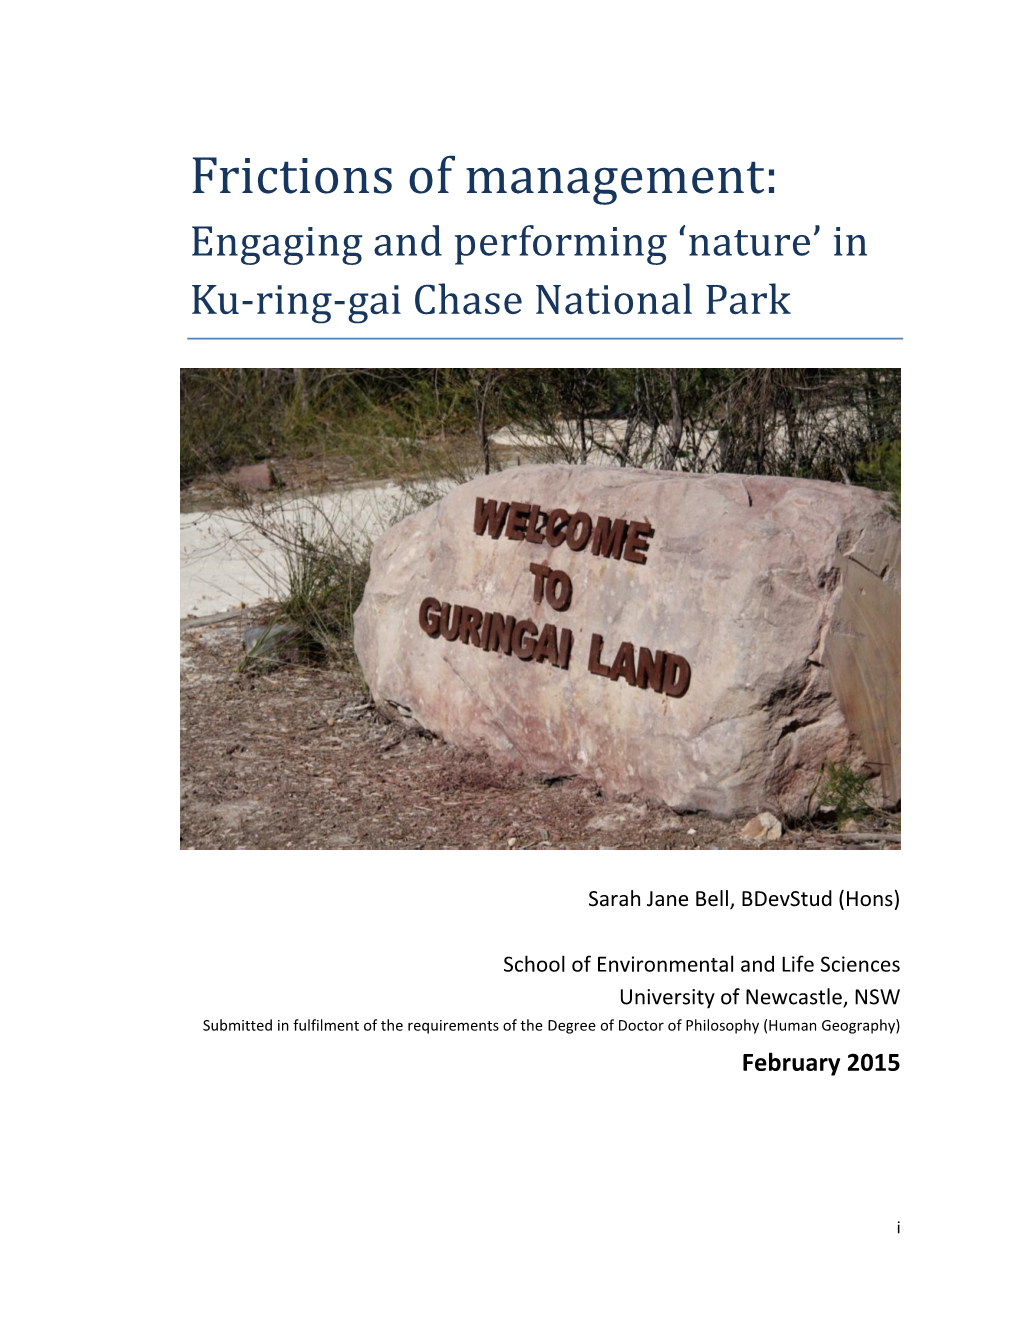 Frictions of Management: Engaging and Performing ‘Nature’ in Ku-Ring-Gai Chase National Park